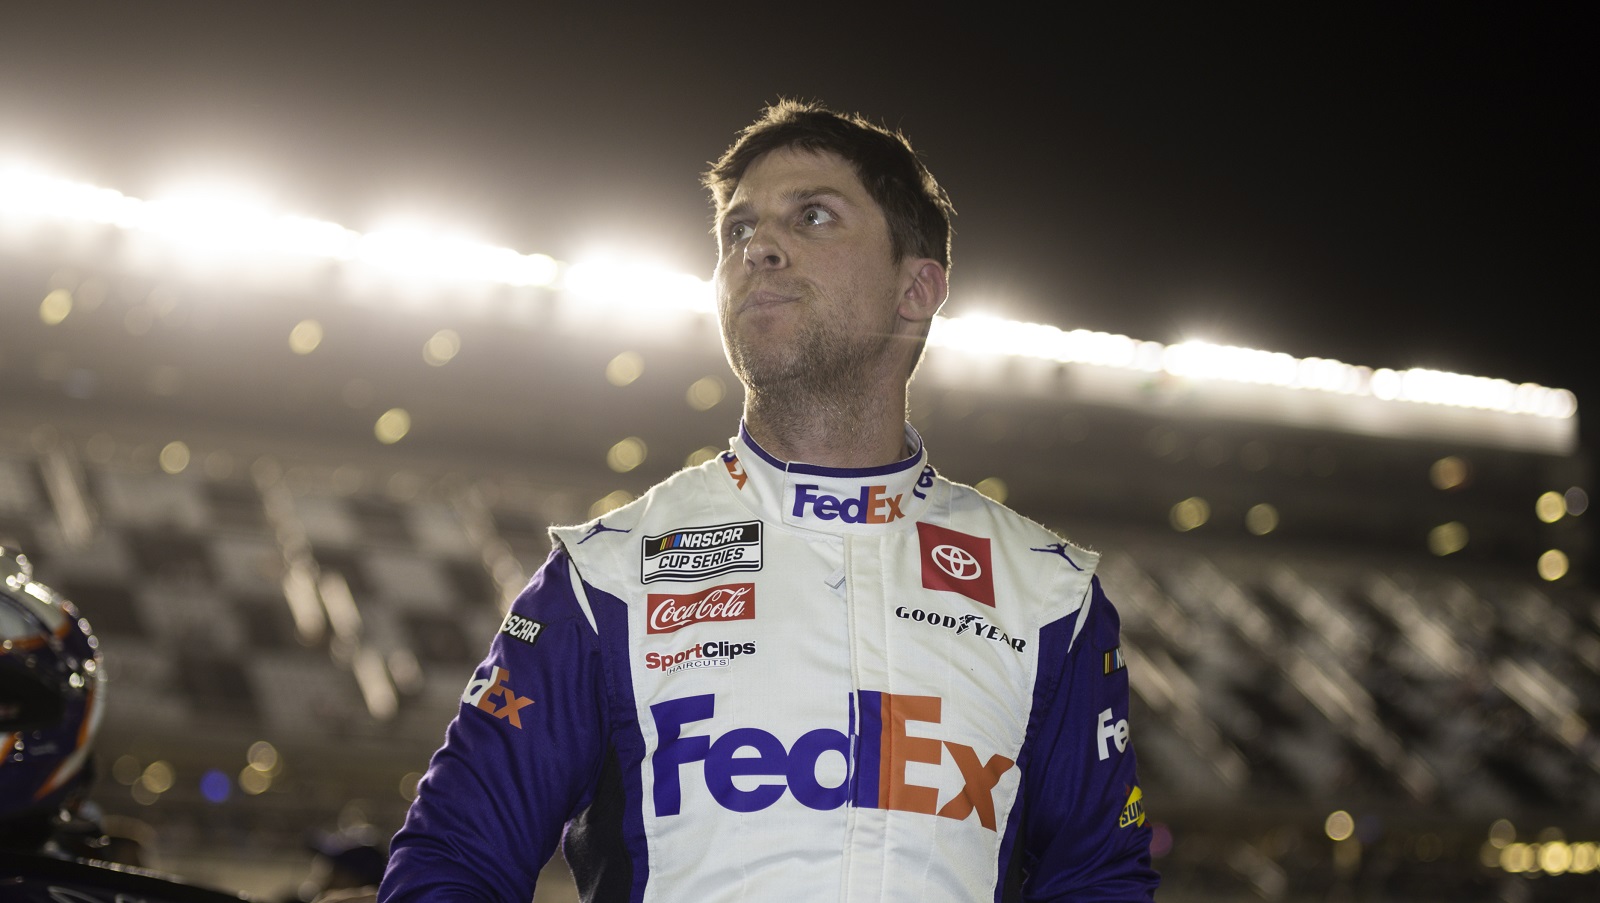 Denny Hamlin, driver of the No. 11 Toyota, waits on pit lane during qualifying for the NASCAR Cup Series Daytona 500 at Daytona International Speedway on Feb. 16, 2022.